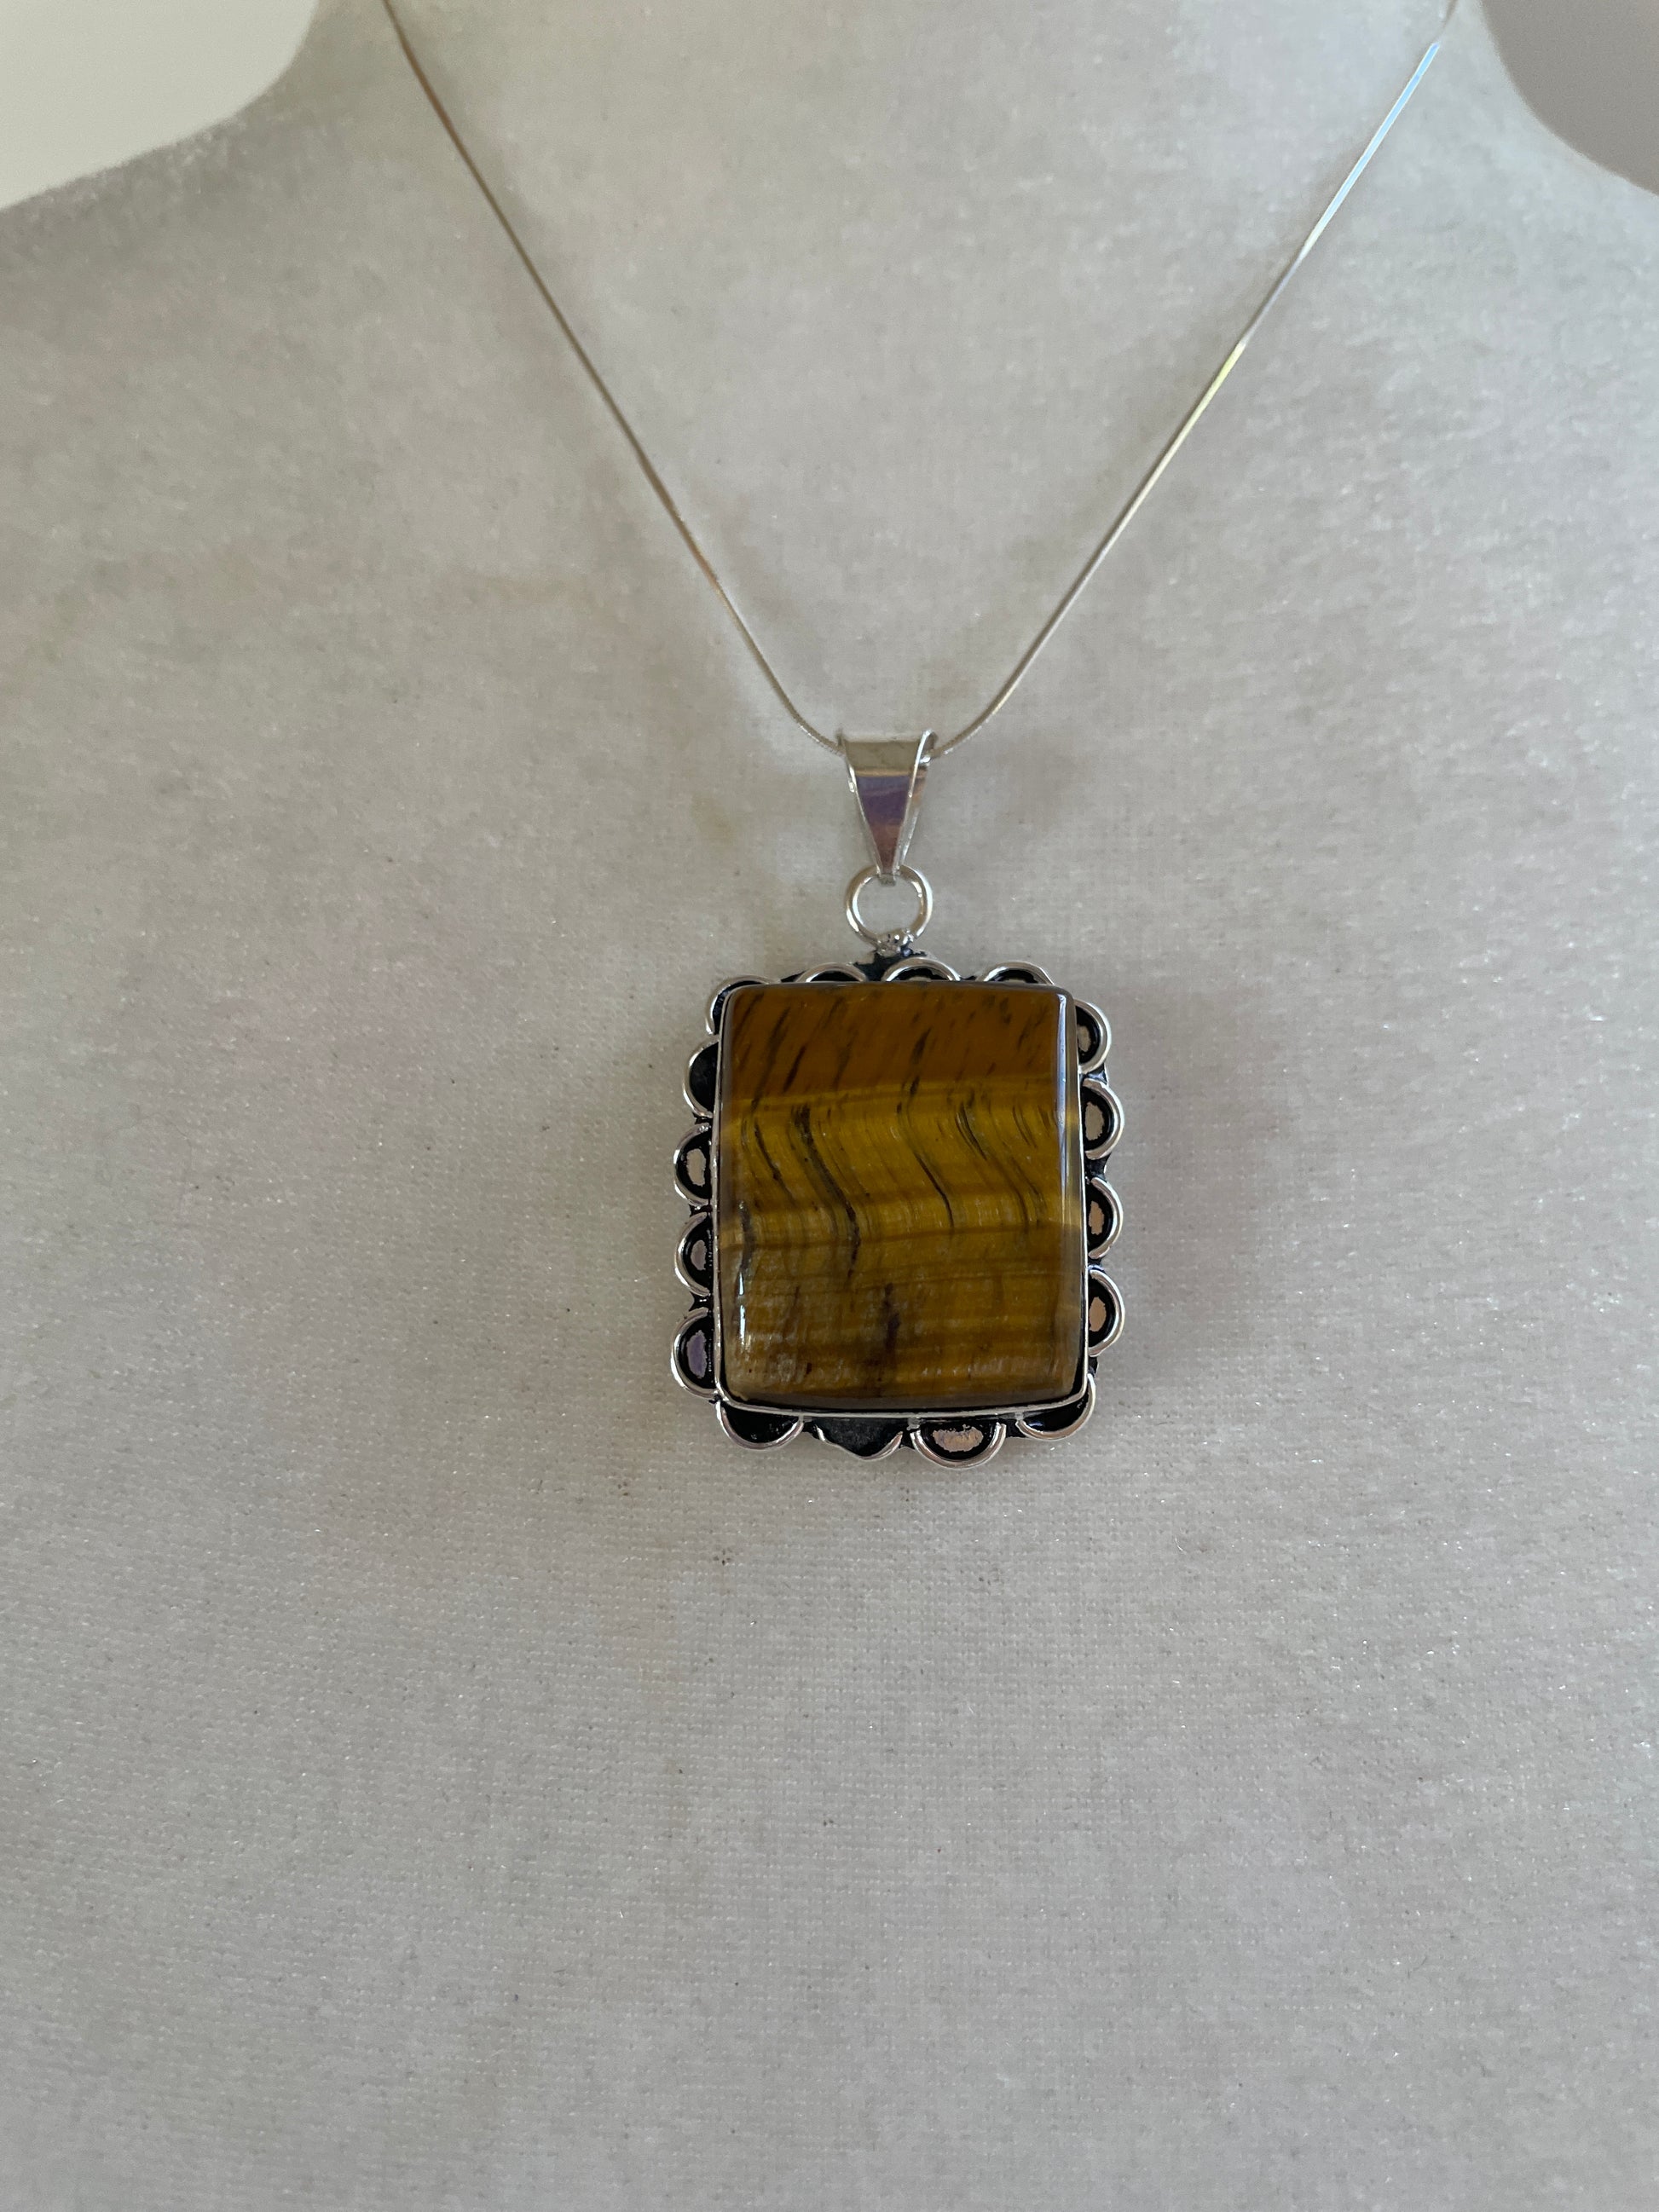  2000s Silver Plated Tigers Eye Pendant Necklace